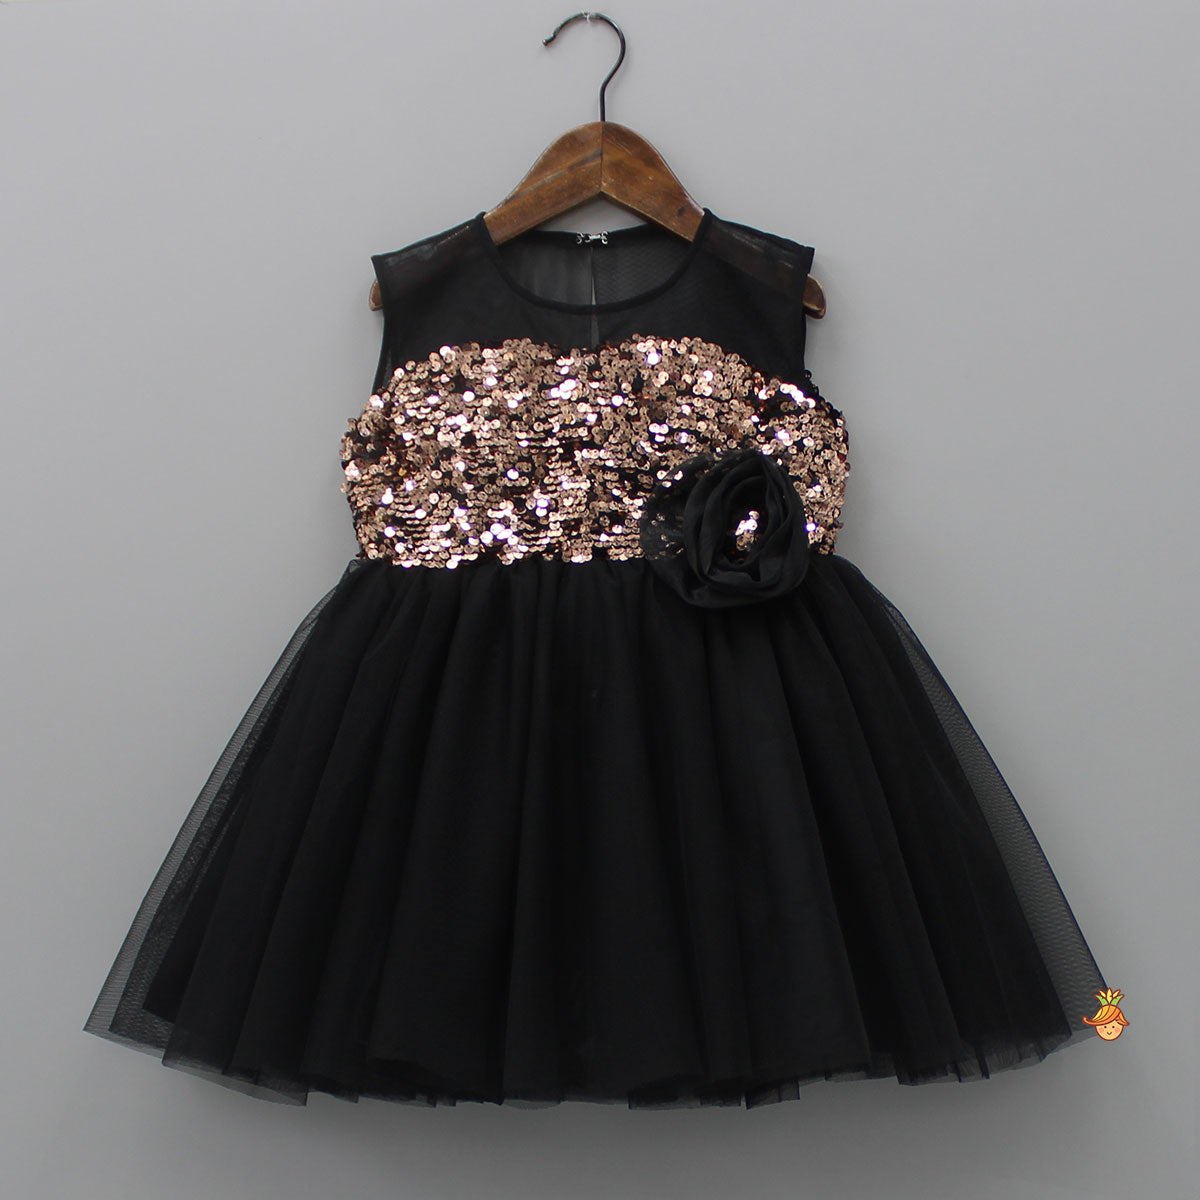 Pre Order: Glamorous Sequins Black Net Dress With Matching Hair Clip